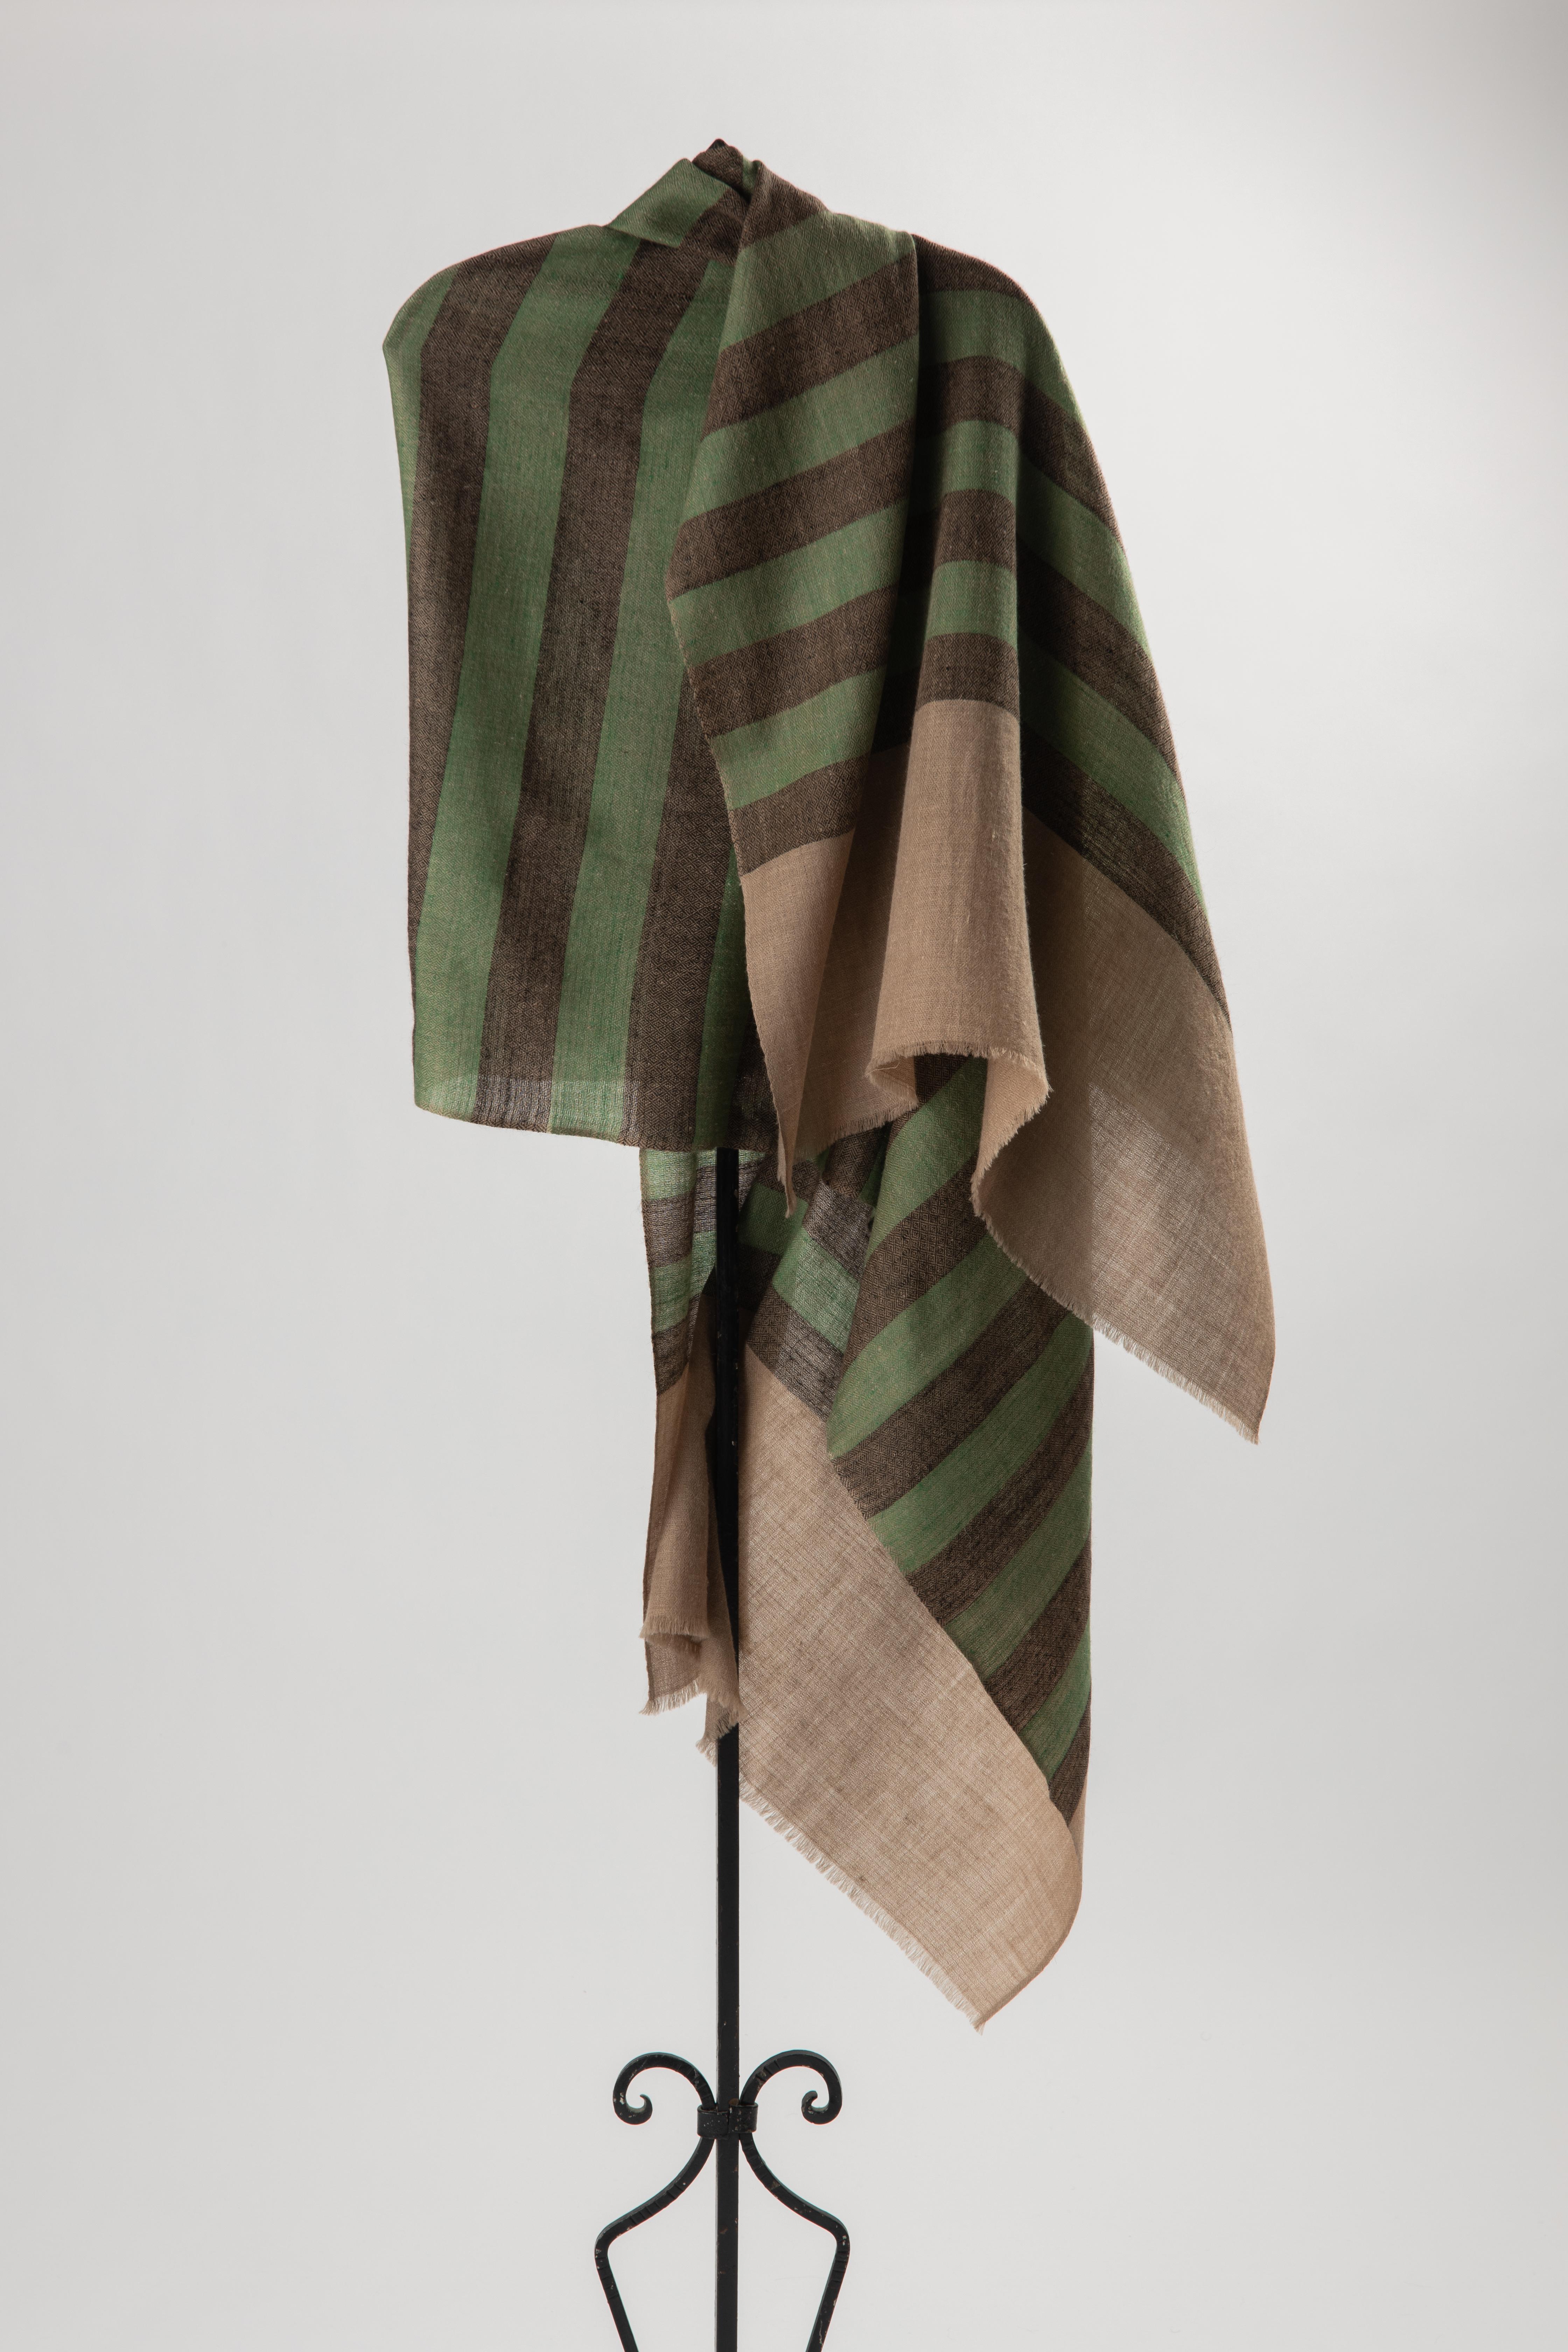 Kashmiri Indian hand woven charcoal and green stripe 100% cashmere shawl with ivory borders. Super luxurious, soft, and lightweight, indescribable as to how wonderful the shawl feels. This piece is one of a kind, made by the artist, has slight